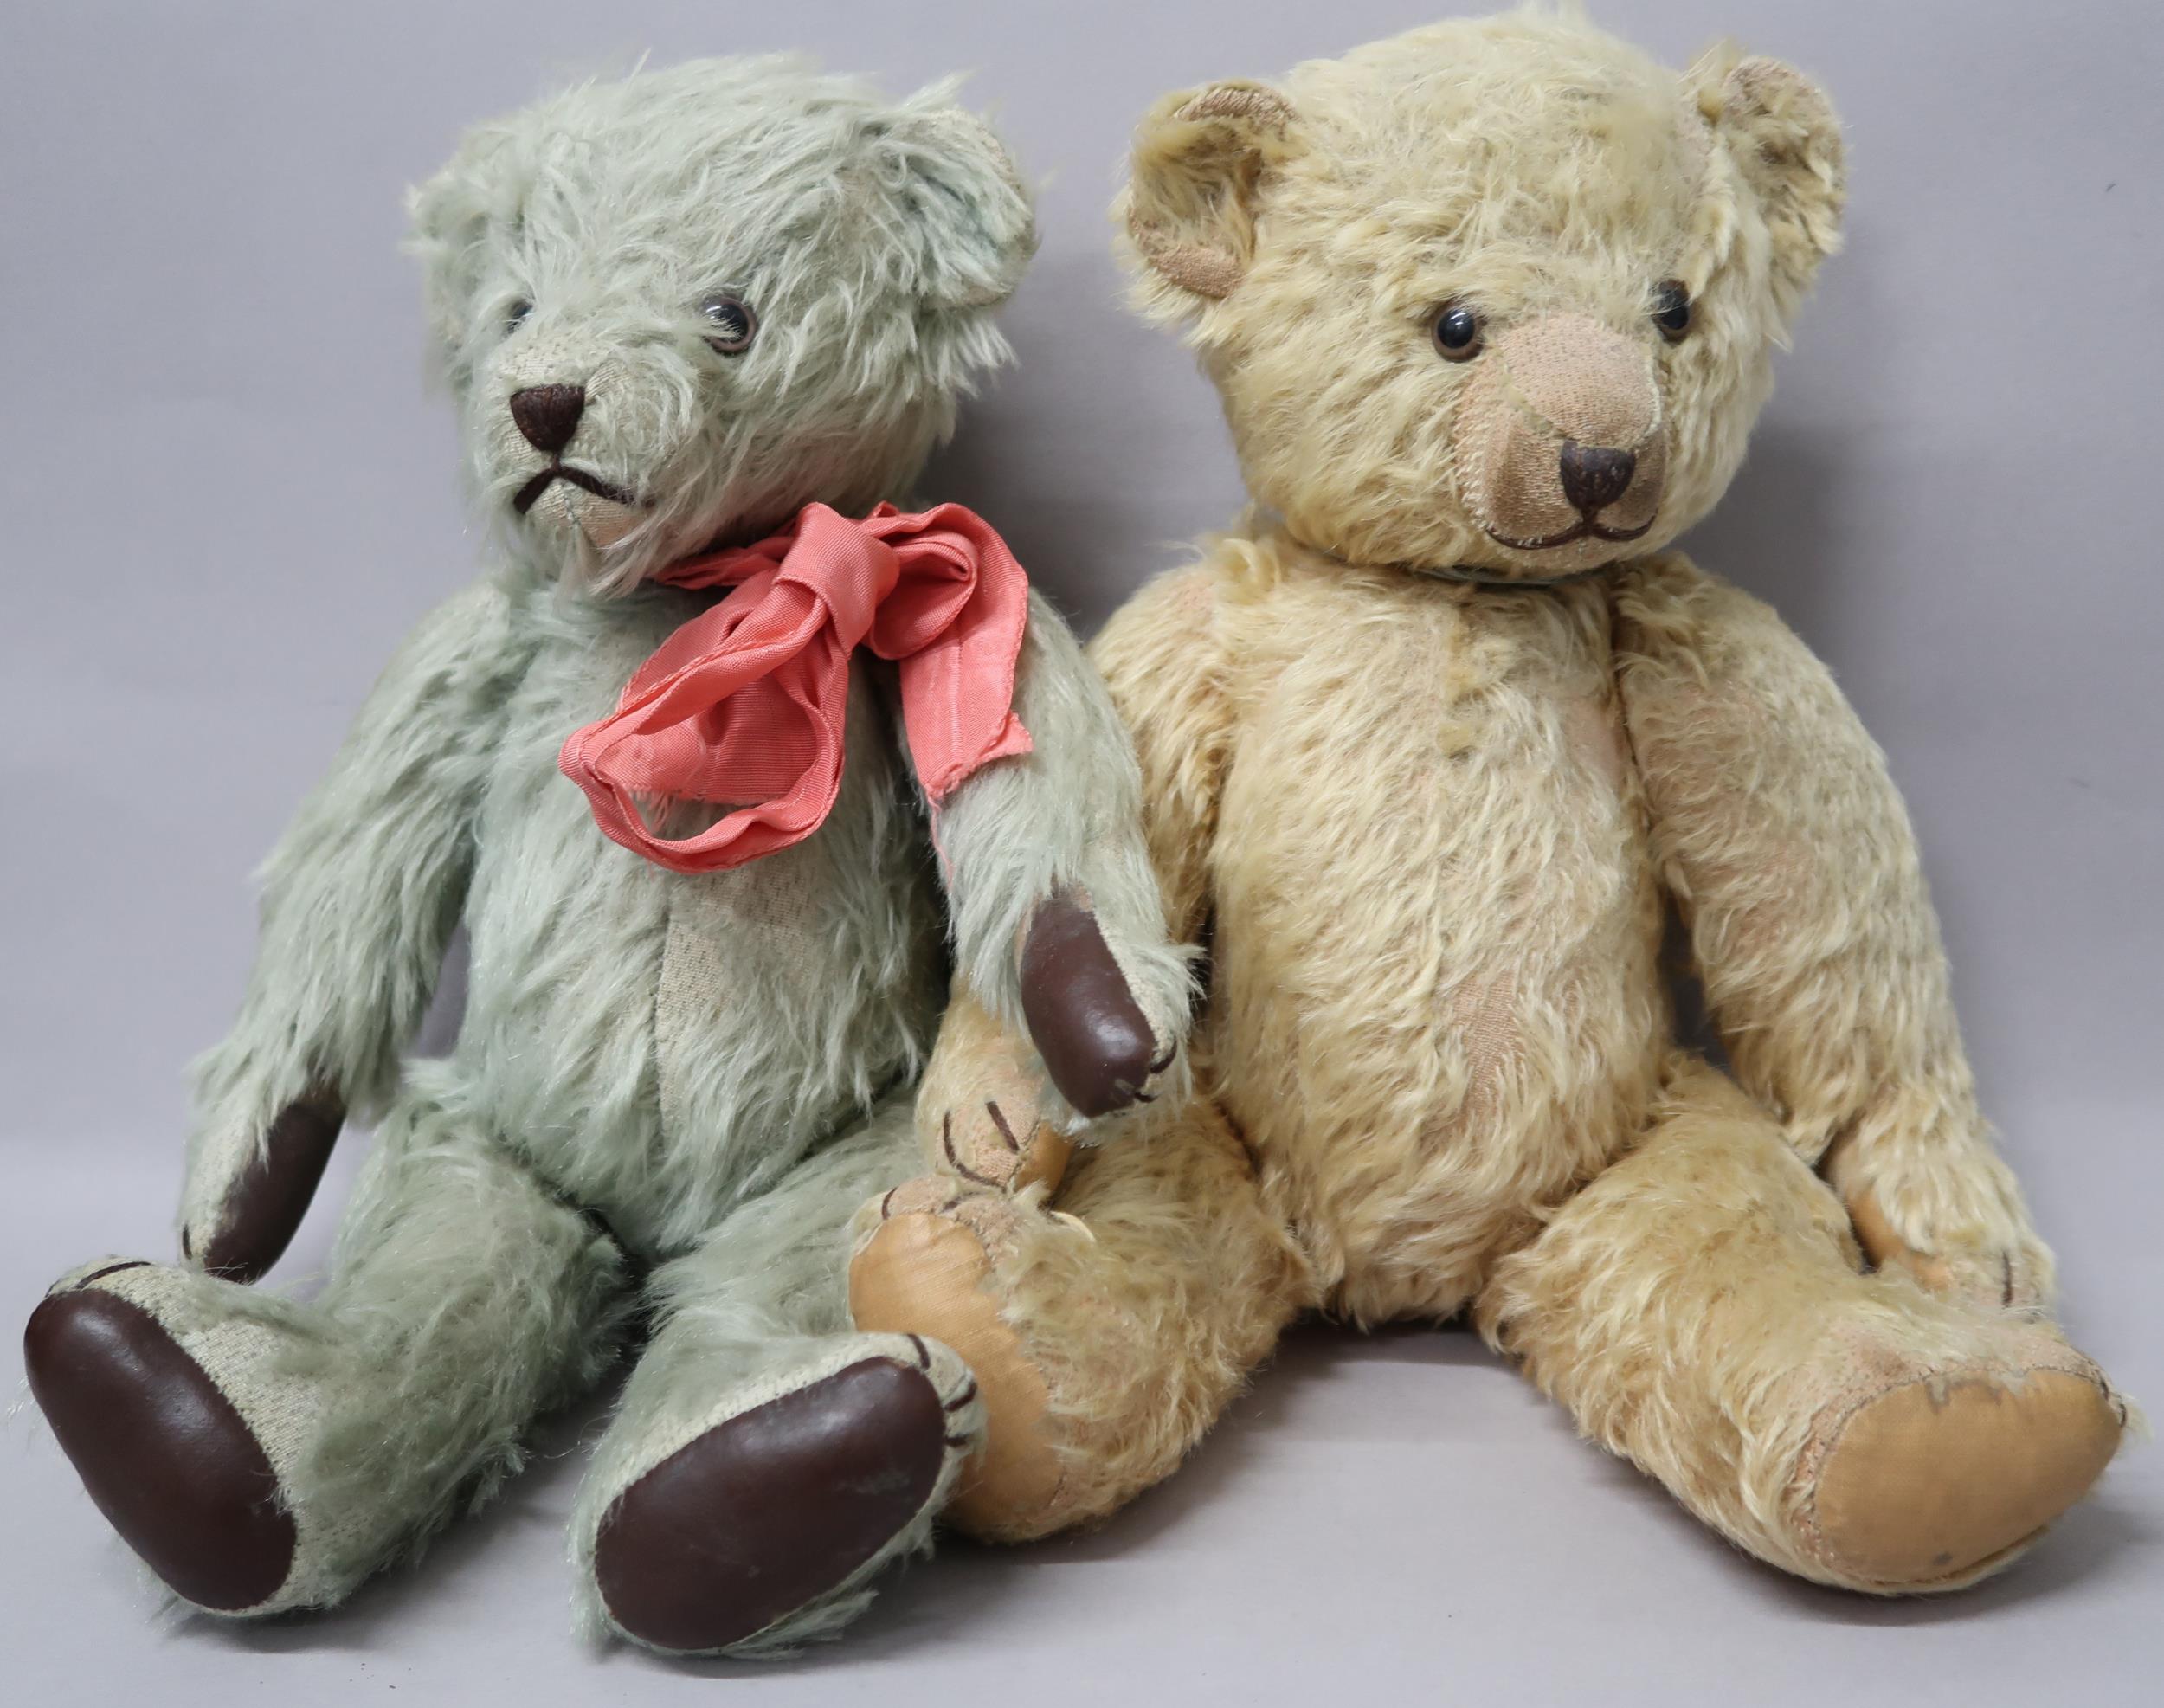 Two vintage Teddy Bears, one being manufactured by Bedford Bears.